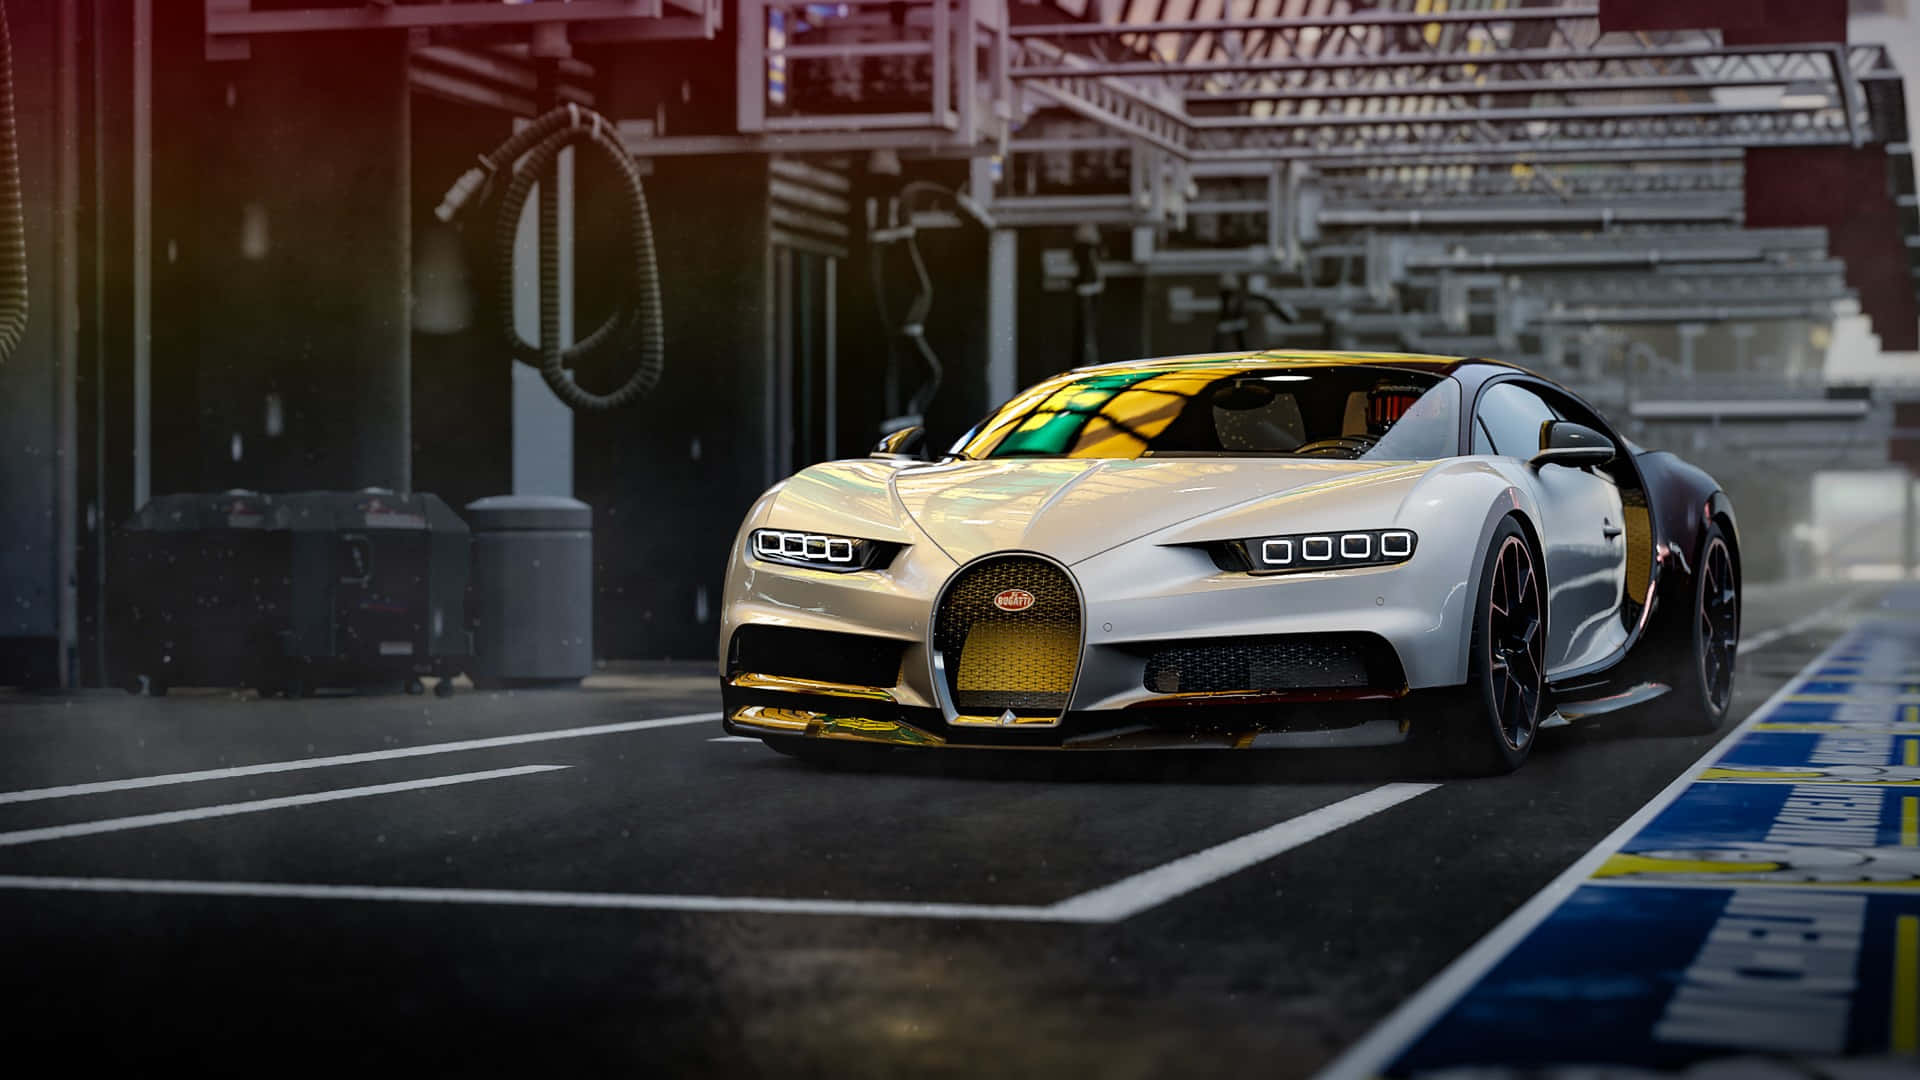 Breathtaking Bugatti Chiron in action on a twisty road Wallpaper